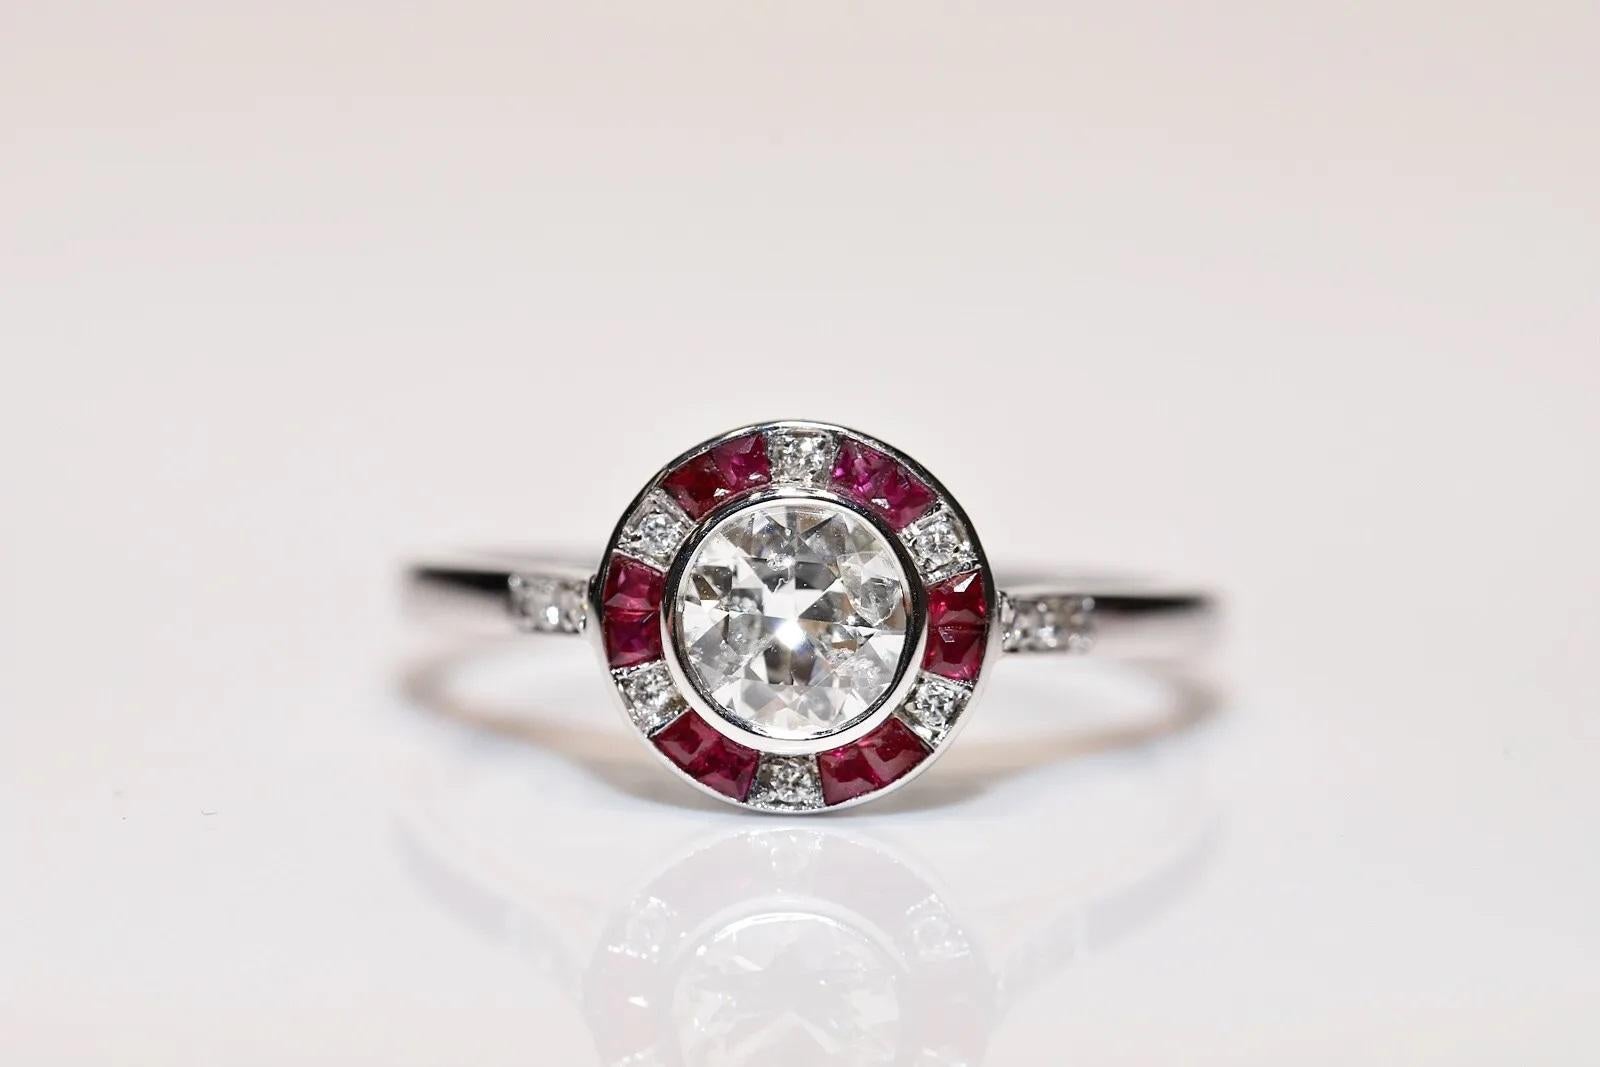 In very good condition.
Total weight is 2.8 grams.
Totally is center diamond 0.50 carat.
Totally is side diamond 0.08 carat.
The diamond is has  H color and s2-s3 clarity.
Totally is ruby 0.30 carat.
Ring size is US 6.75 (We offer free resizing)
We